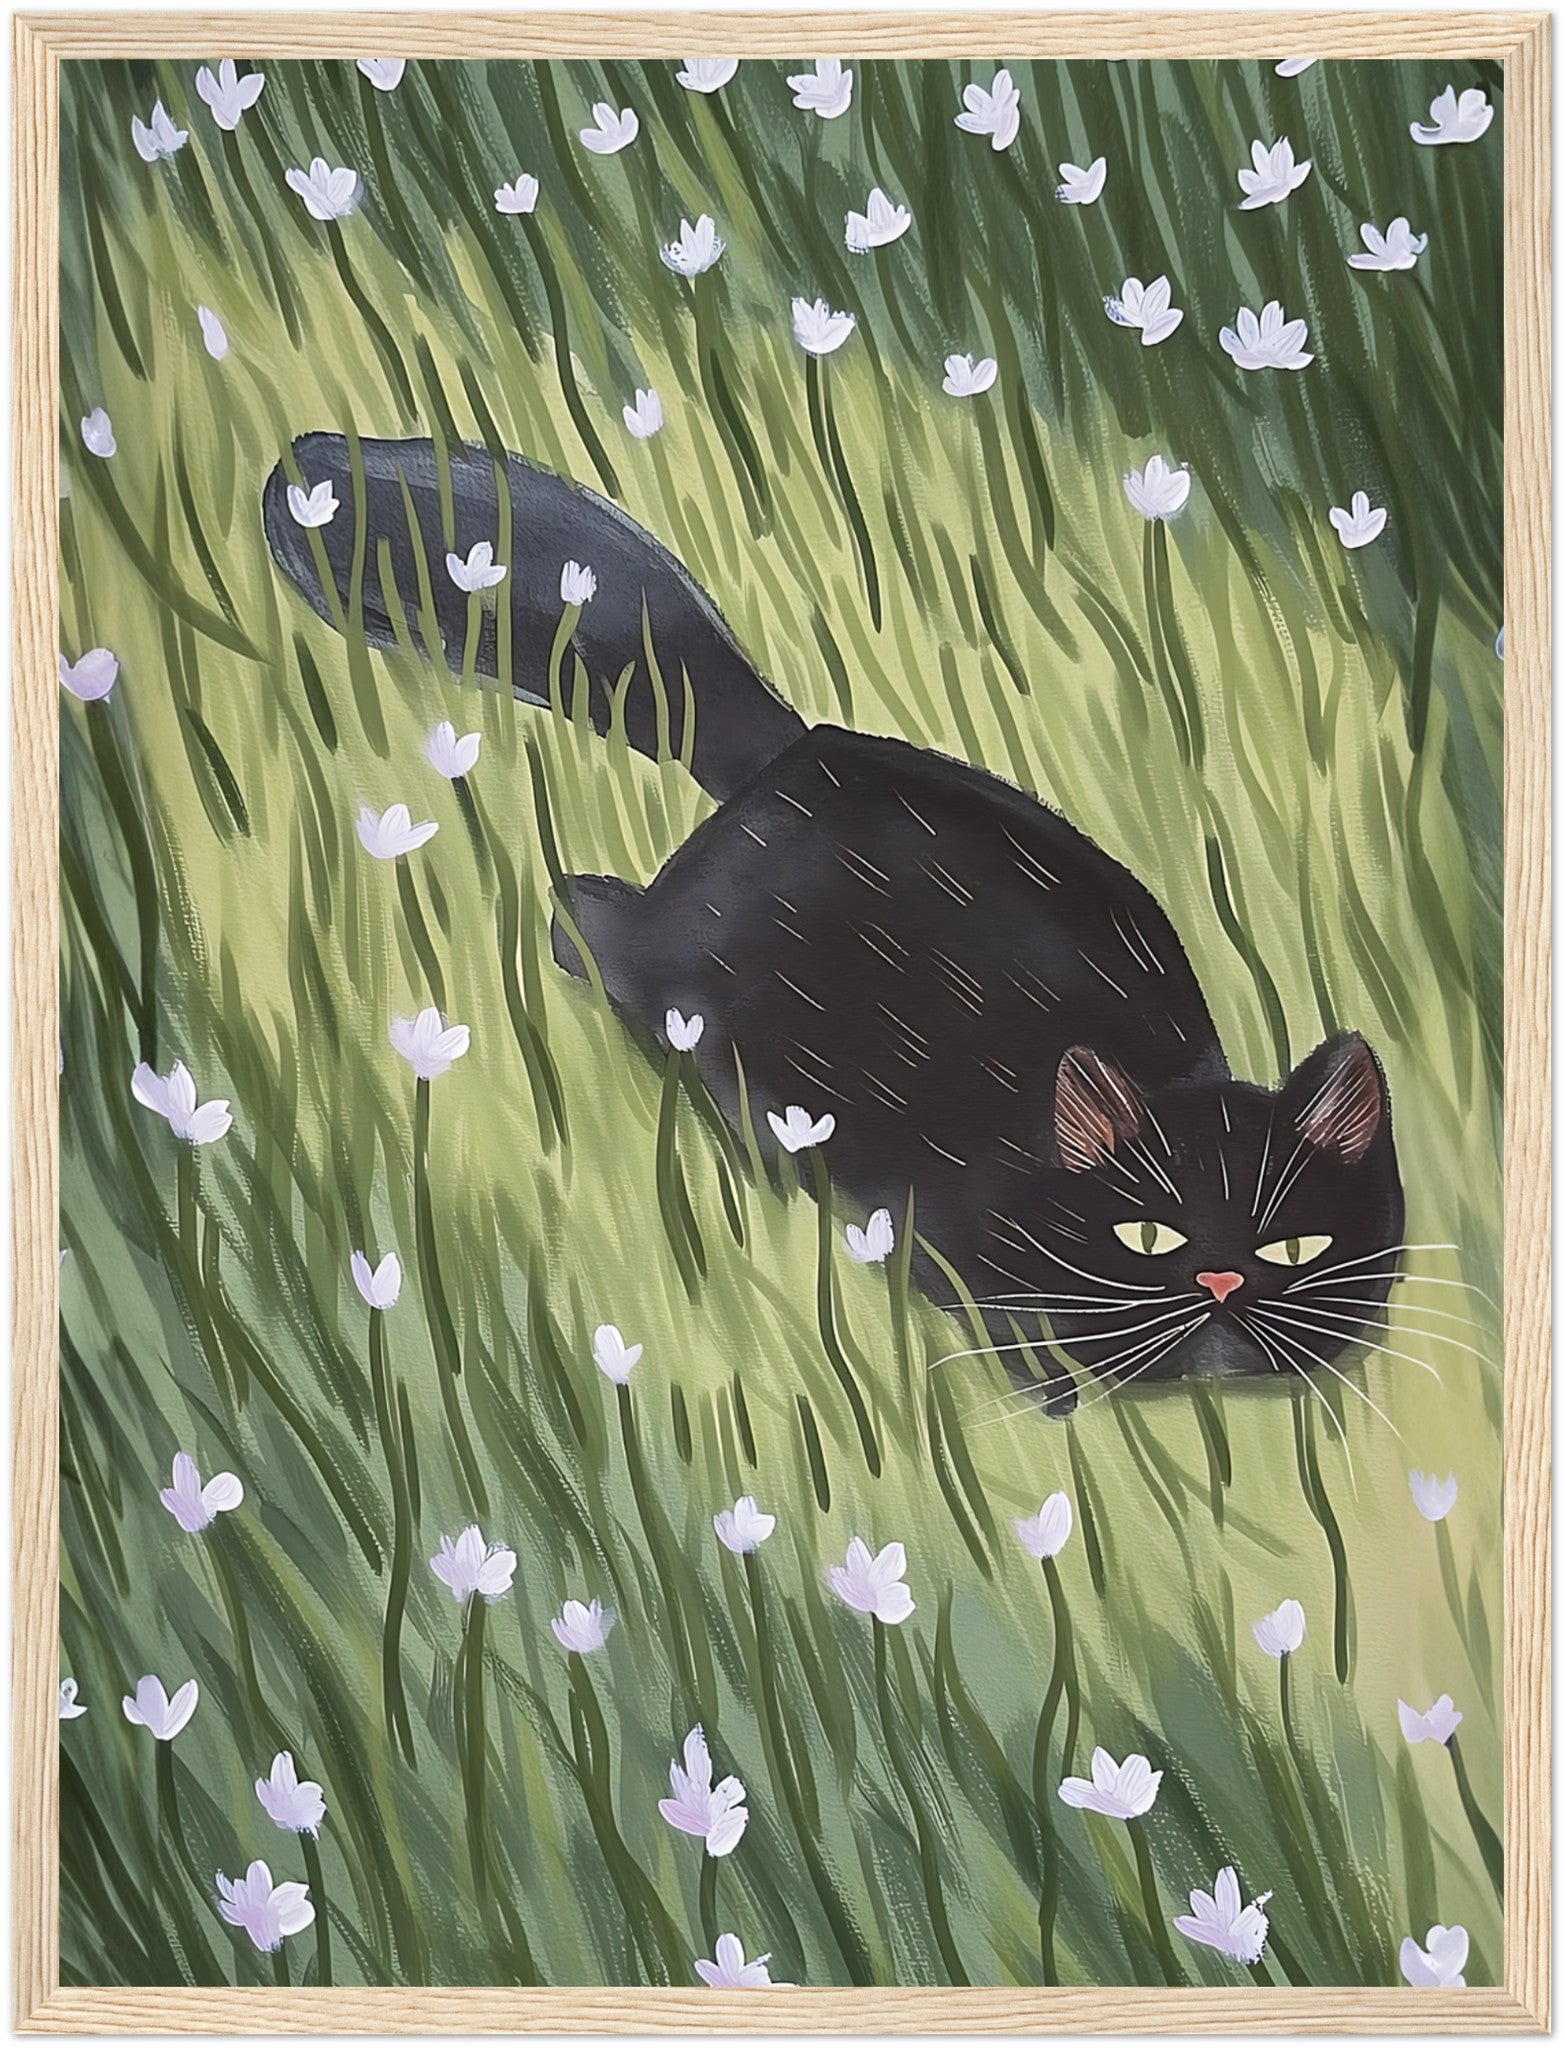 A painting of a black cat walking through a green field with white flowers, framed in wood.